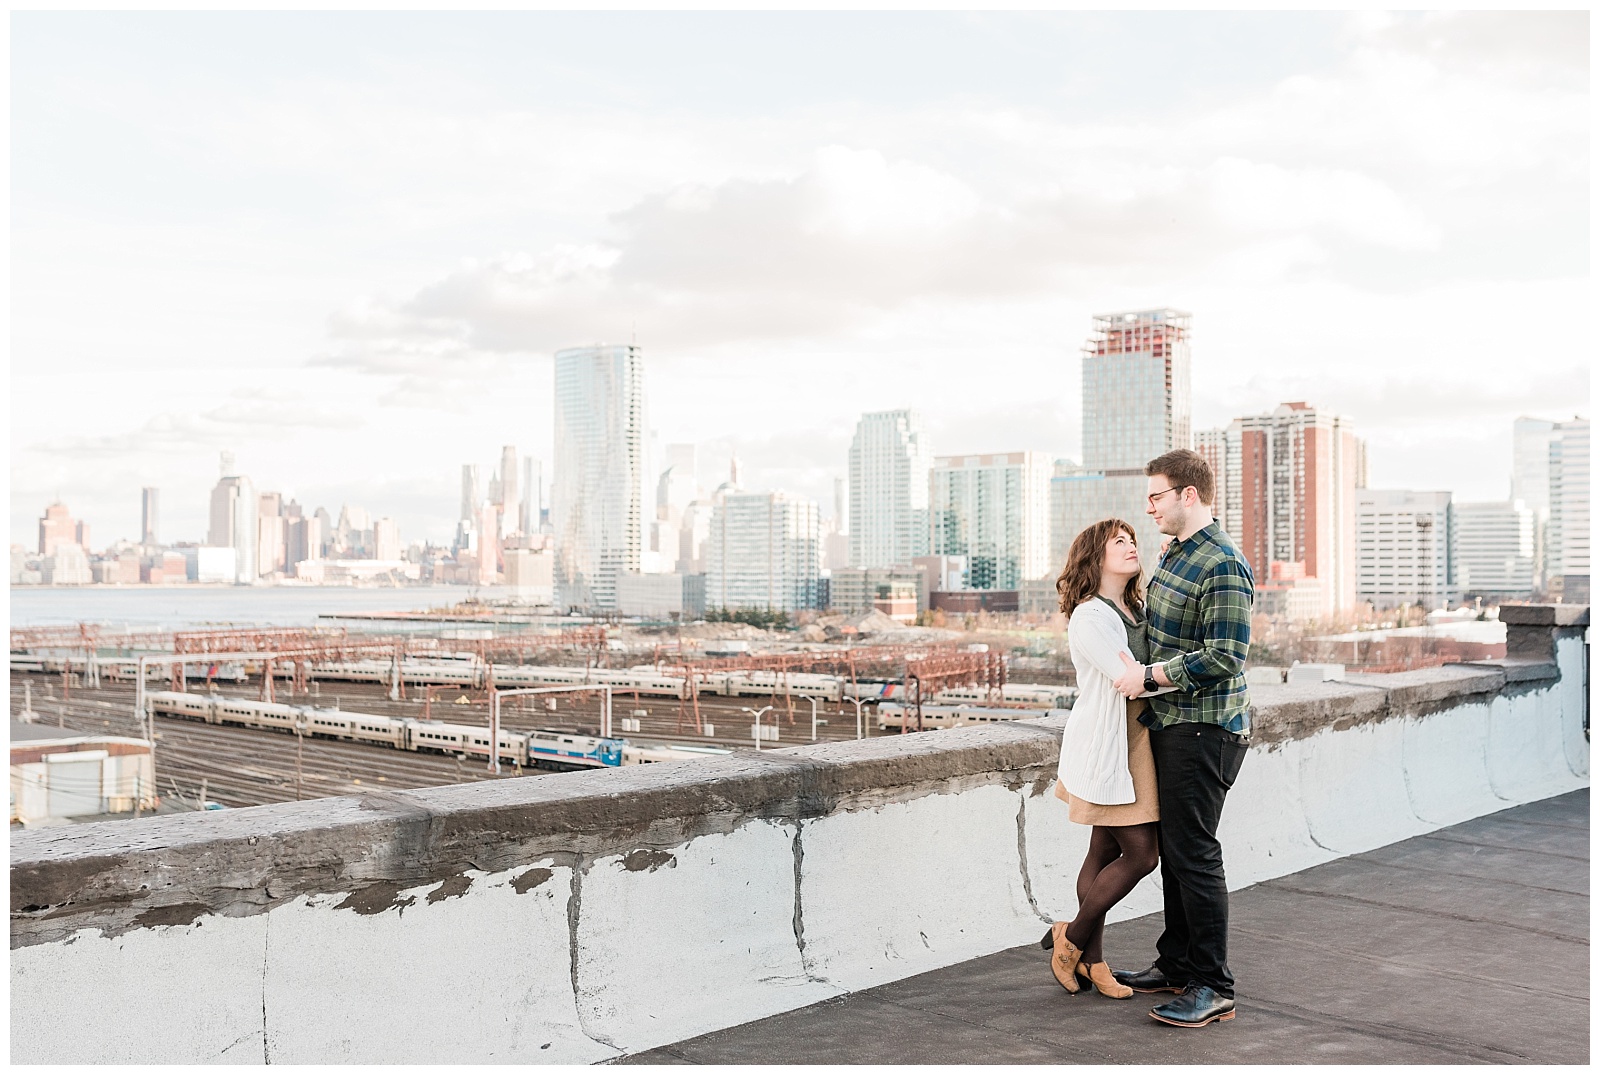 Hoboken, NJ, New Jersey, Rooftop, Engagement Session, Urban, City, Golden Hour, Skyline, Cityscape, NYC